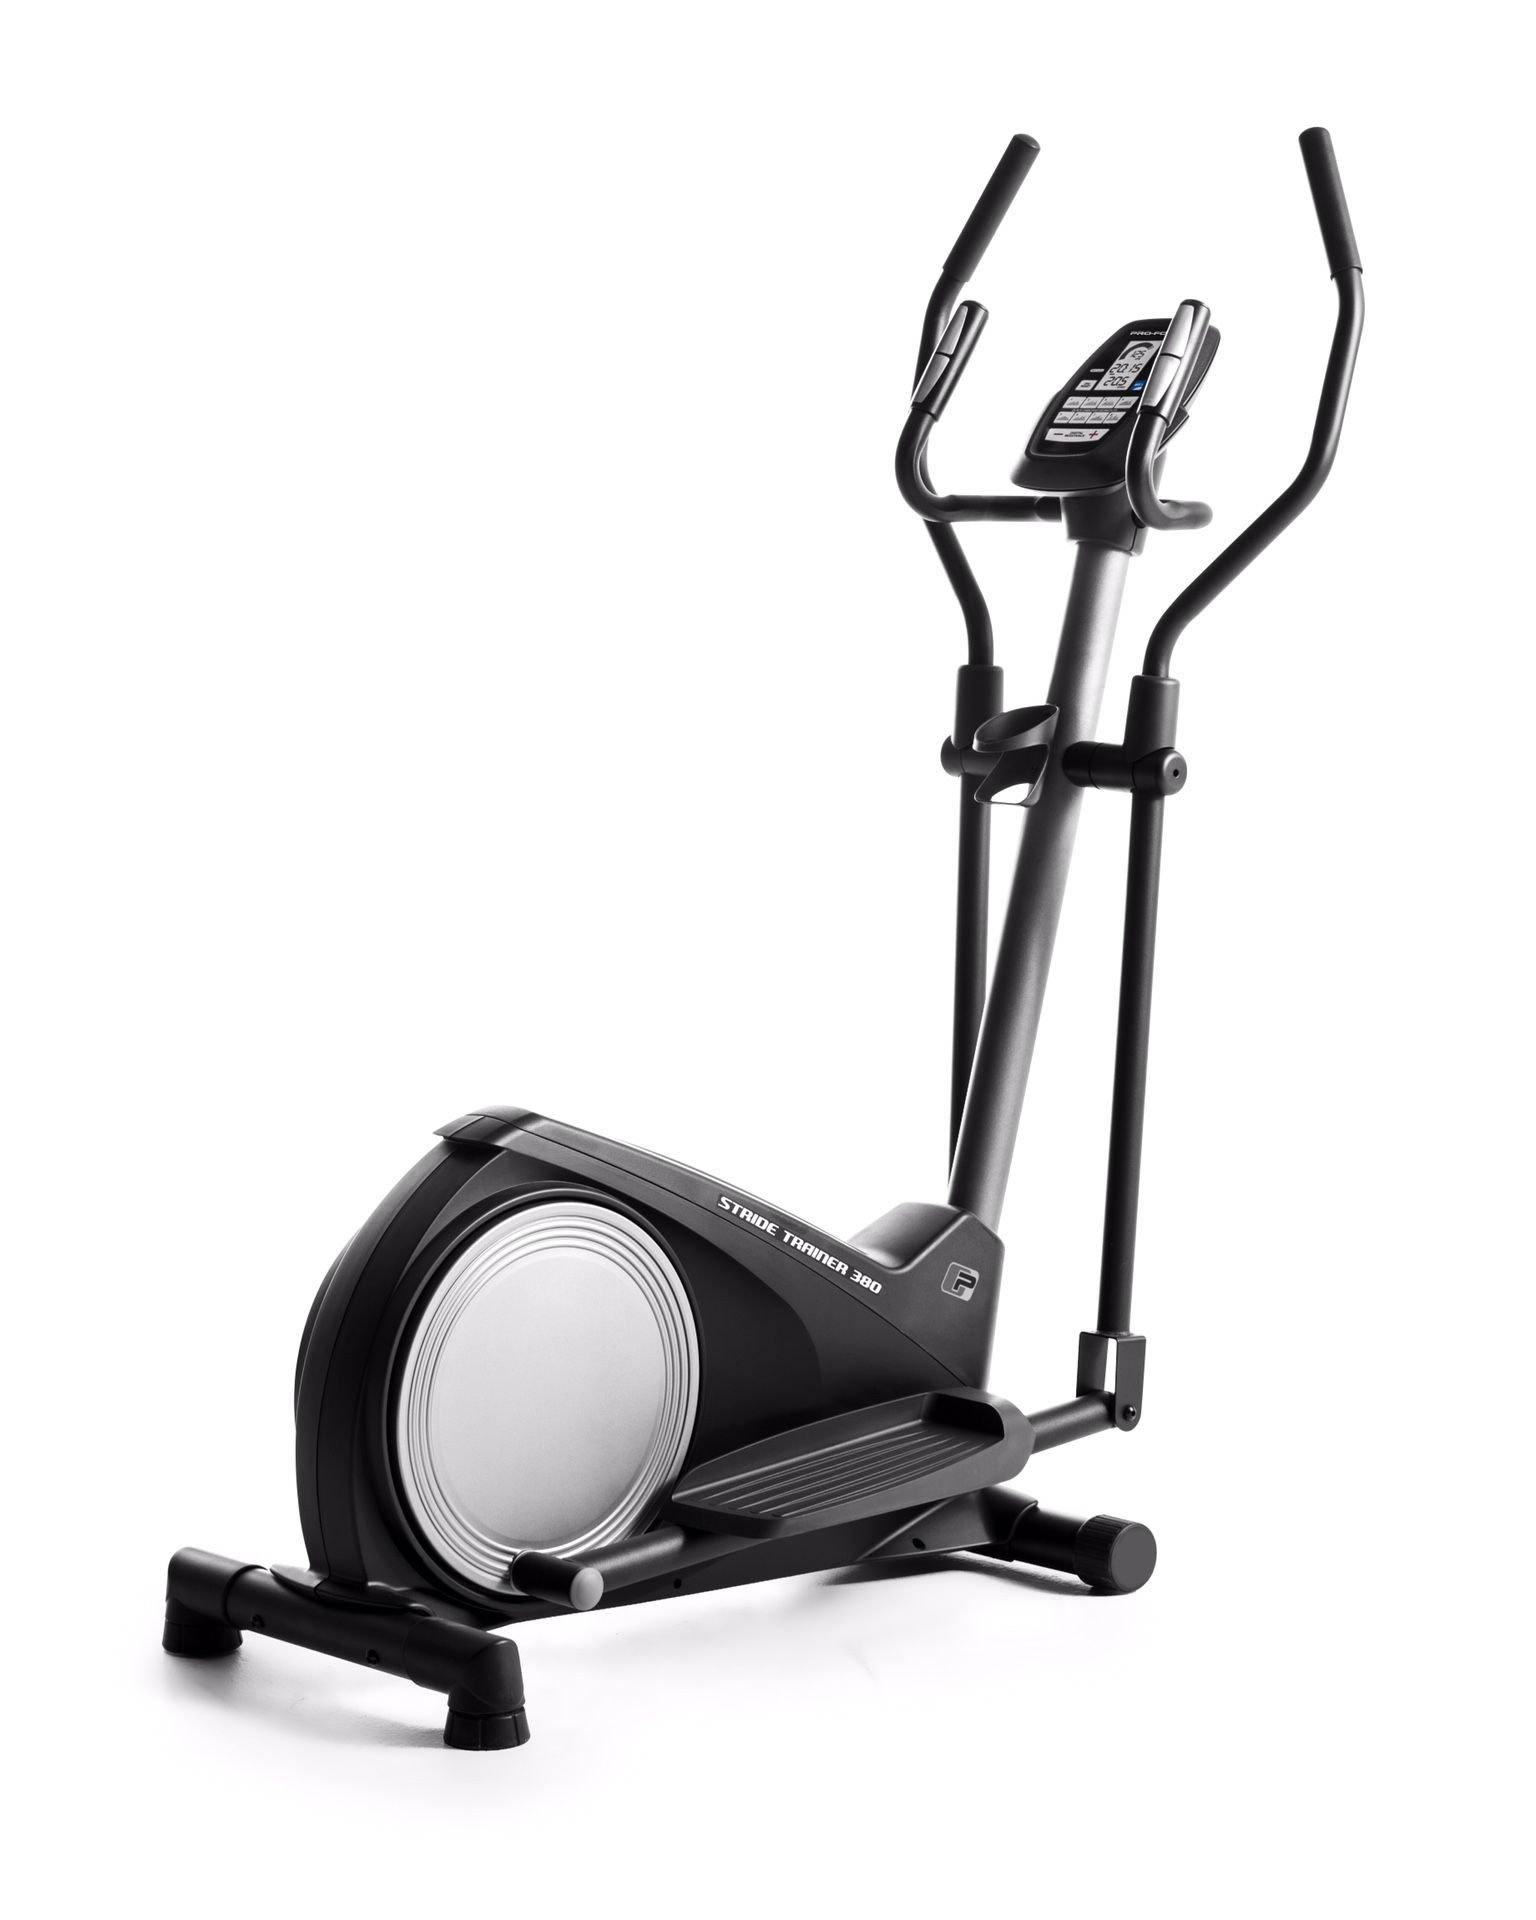 380 Rear-Drive Elliptical Indoor Home Workout